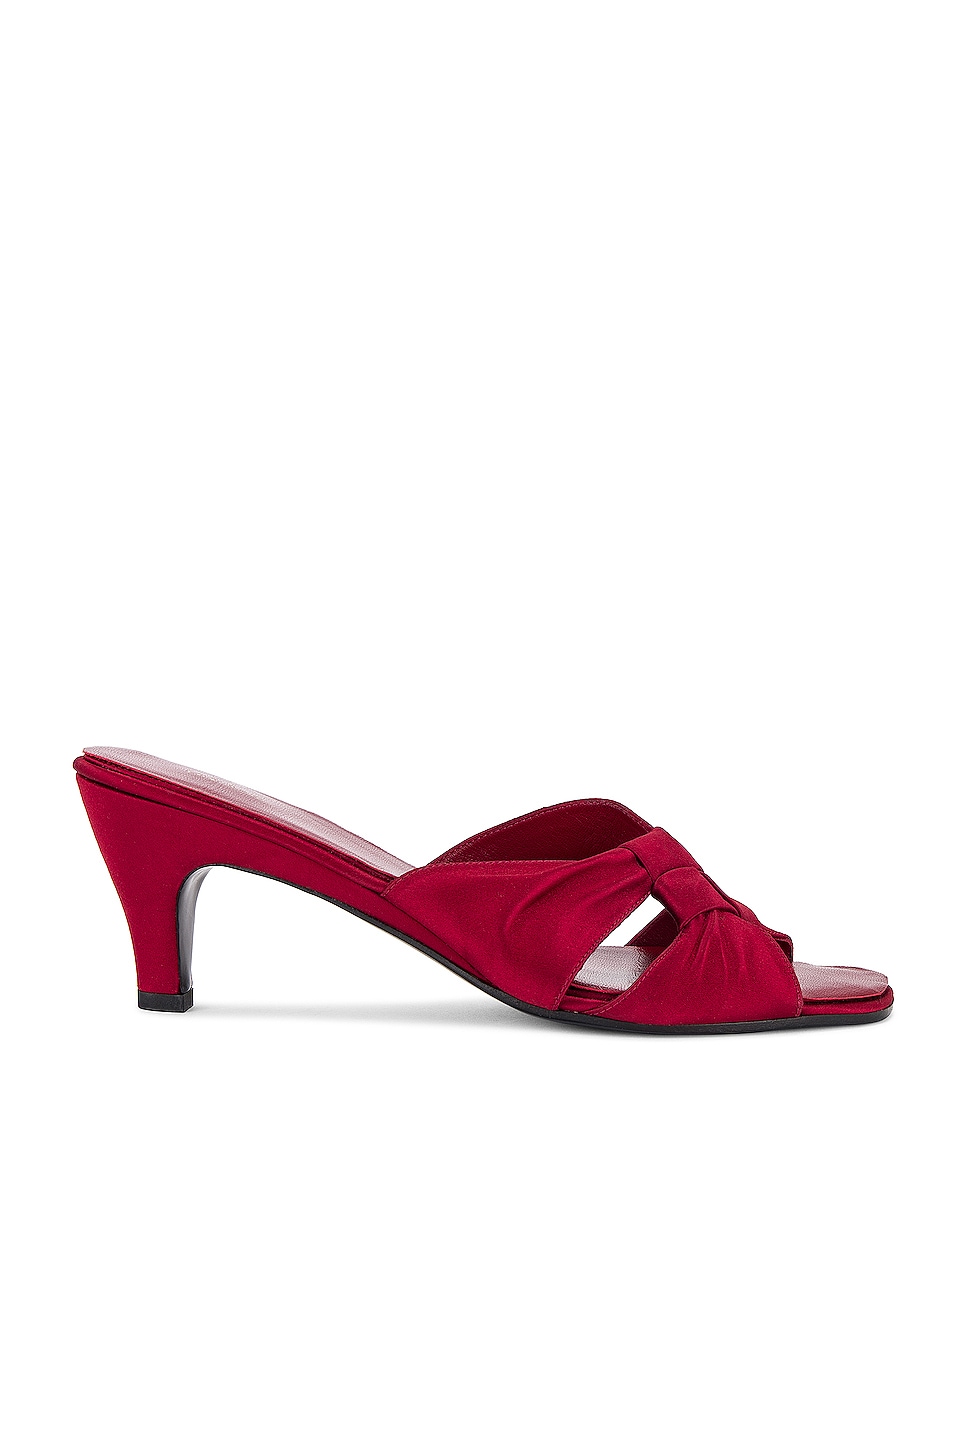 Image 1 of The Row Soft Knot Mule Sandal in Red